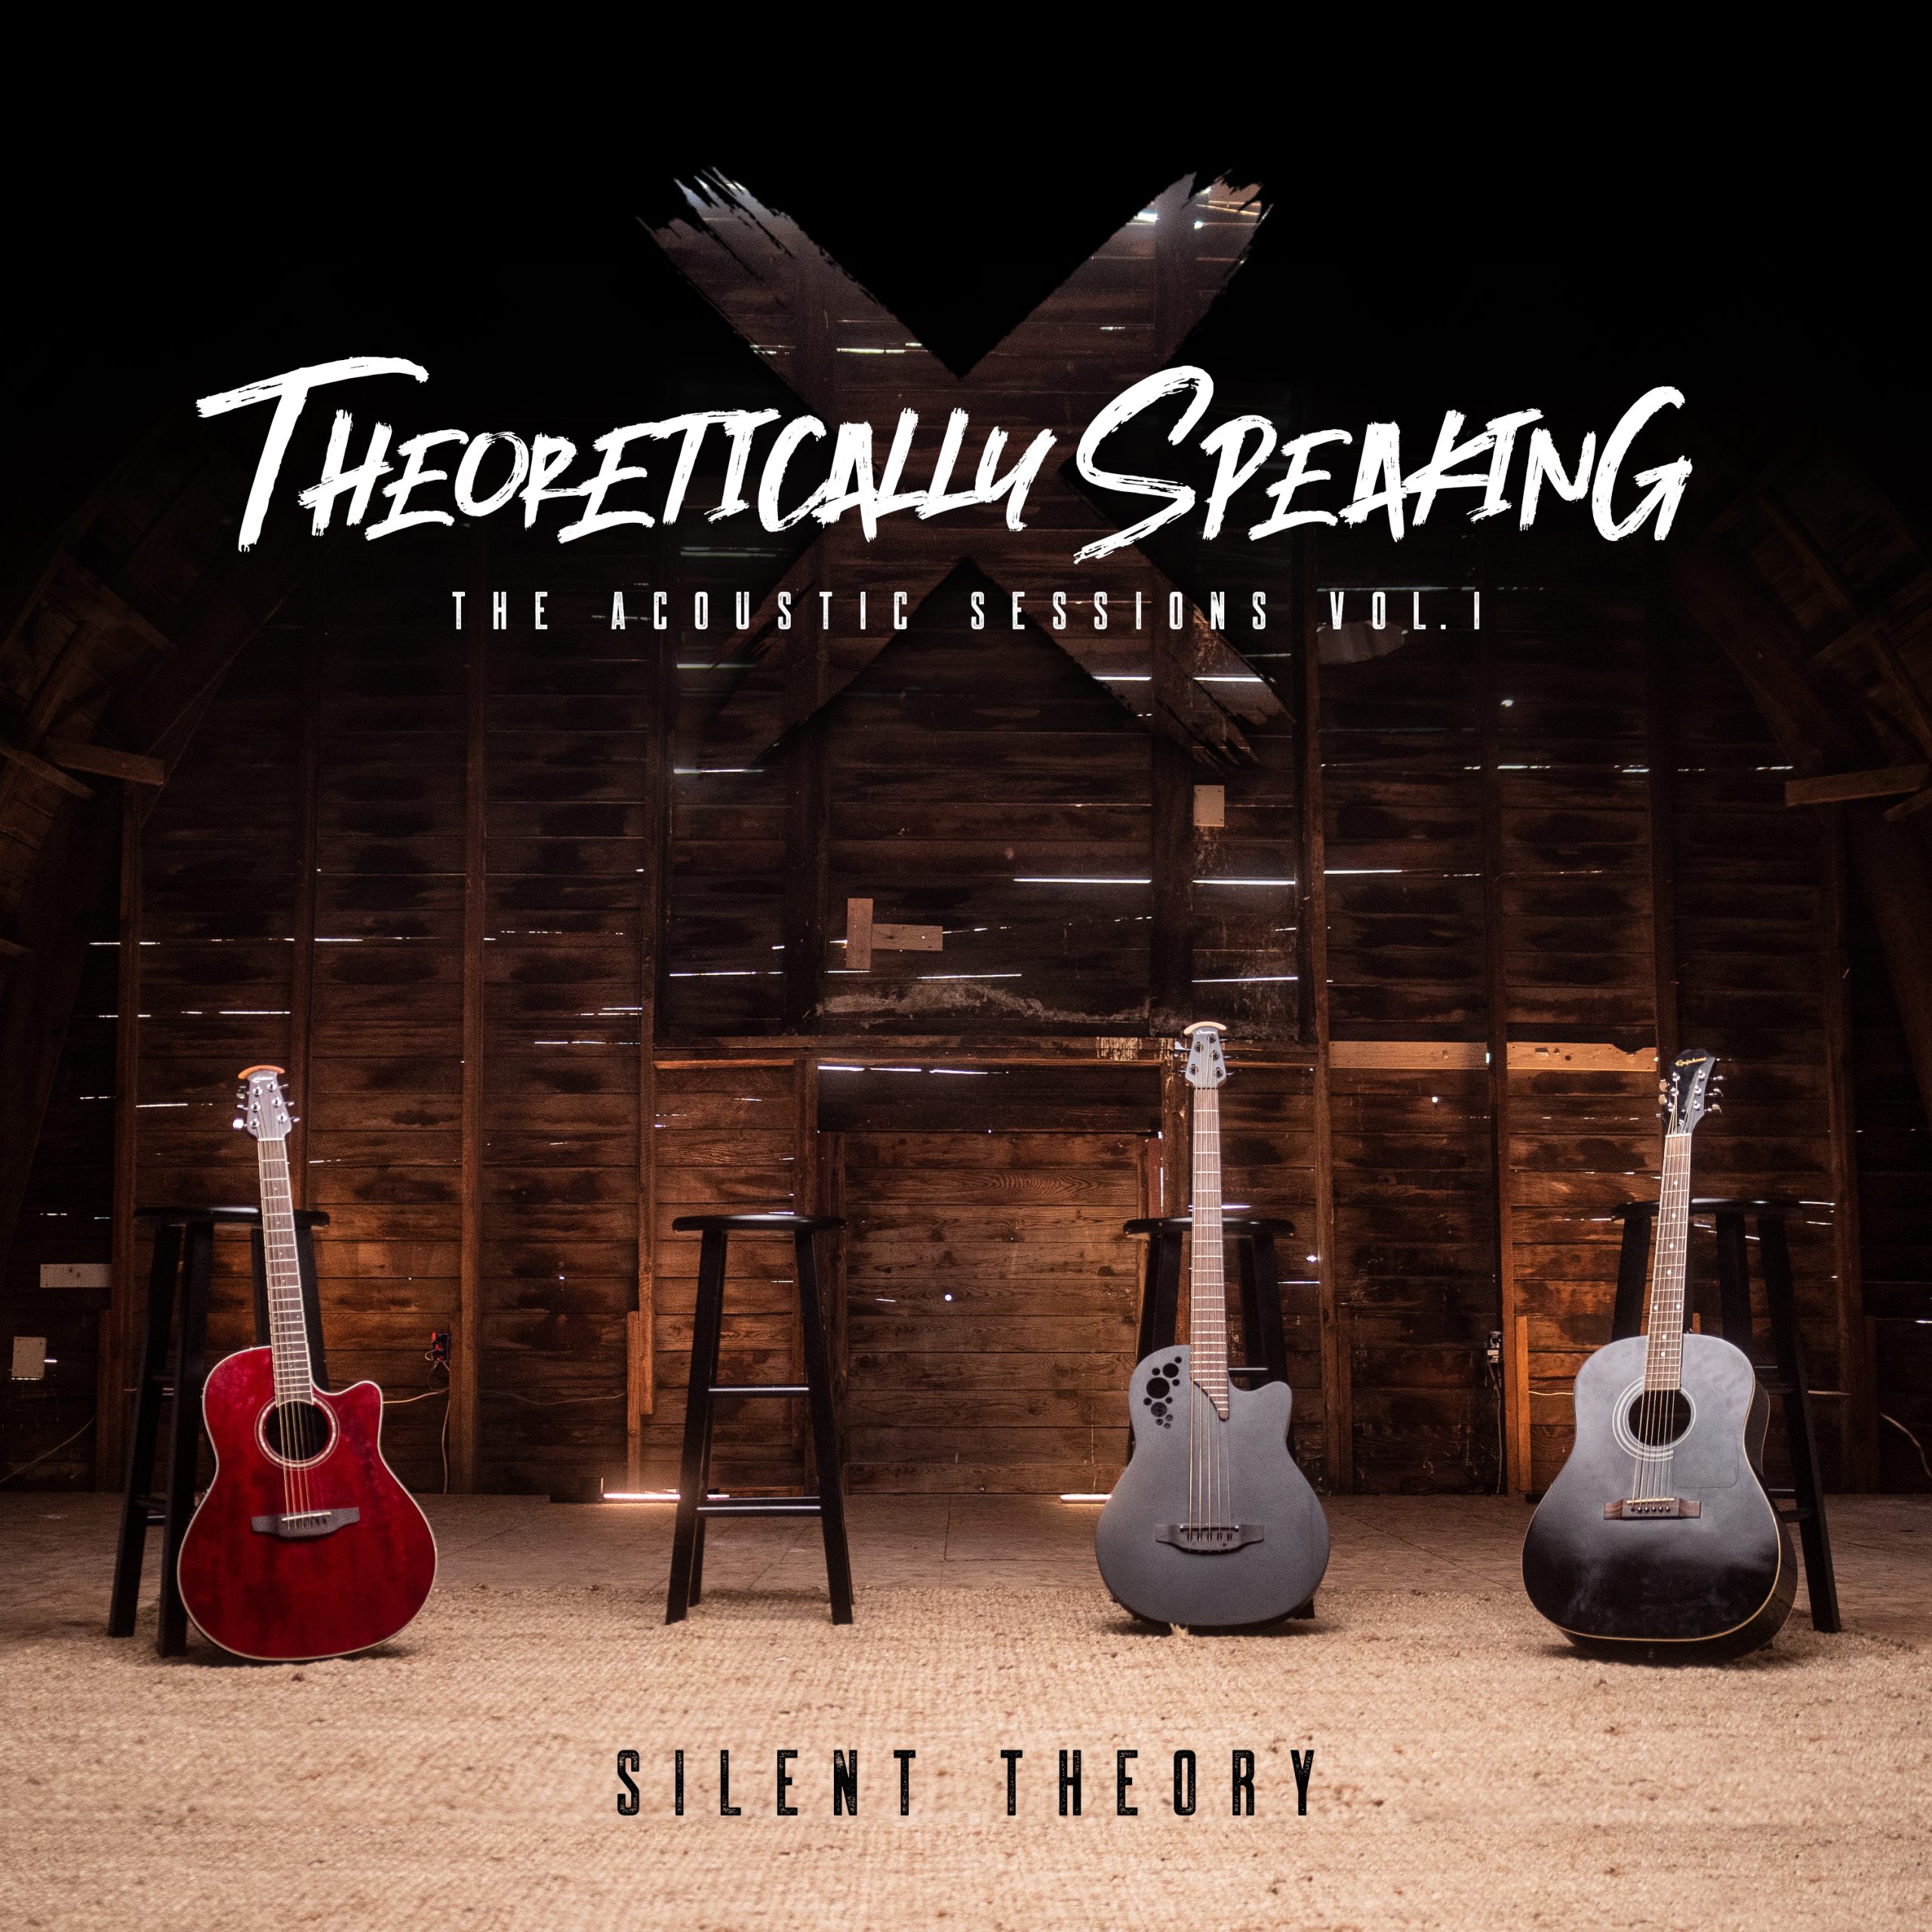 Silent theory - shaking cages